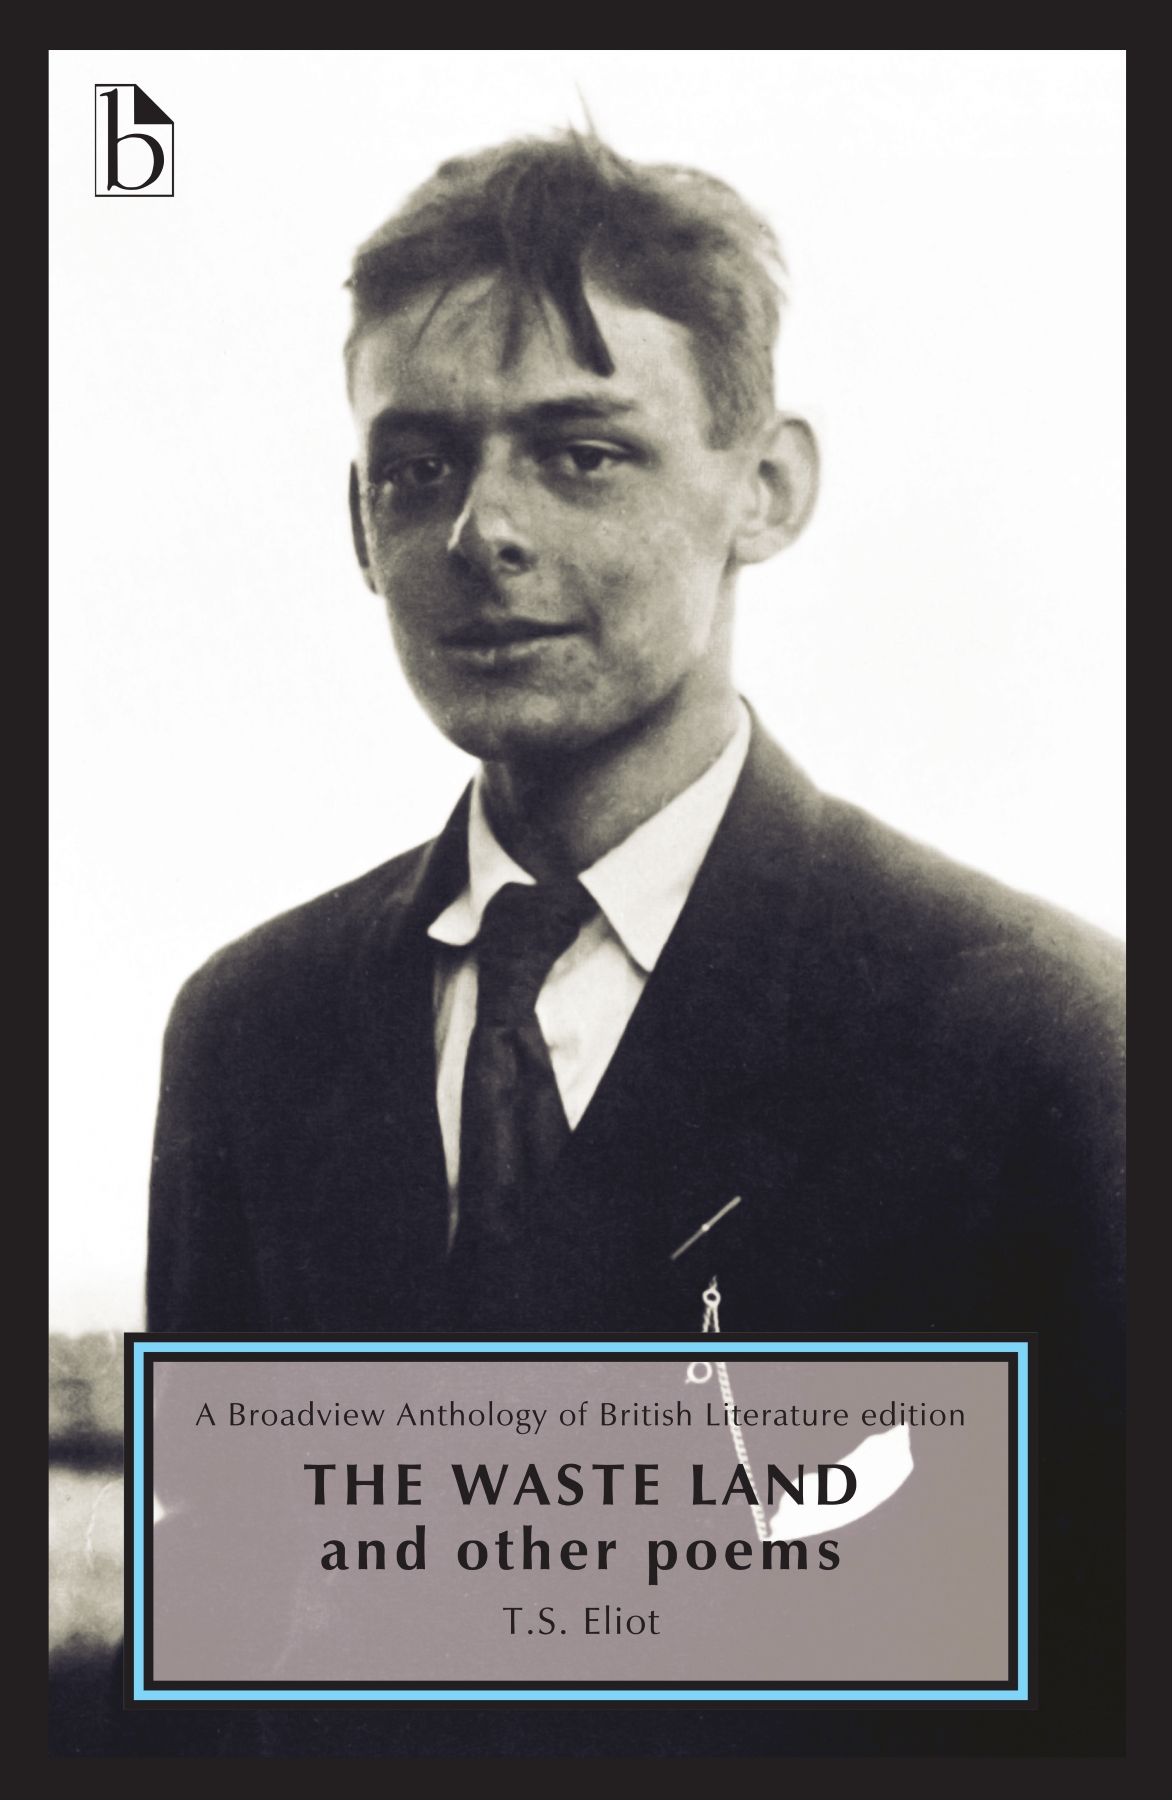 T. S. Eliot: The waste land and other poems (2011, Broadview Press)